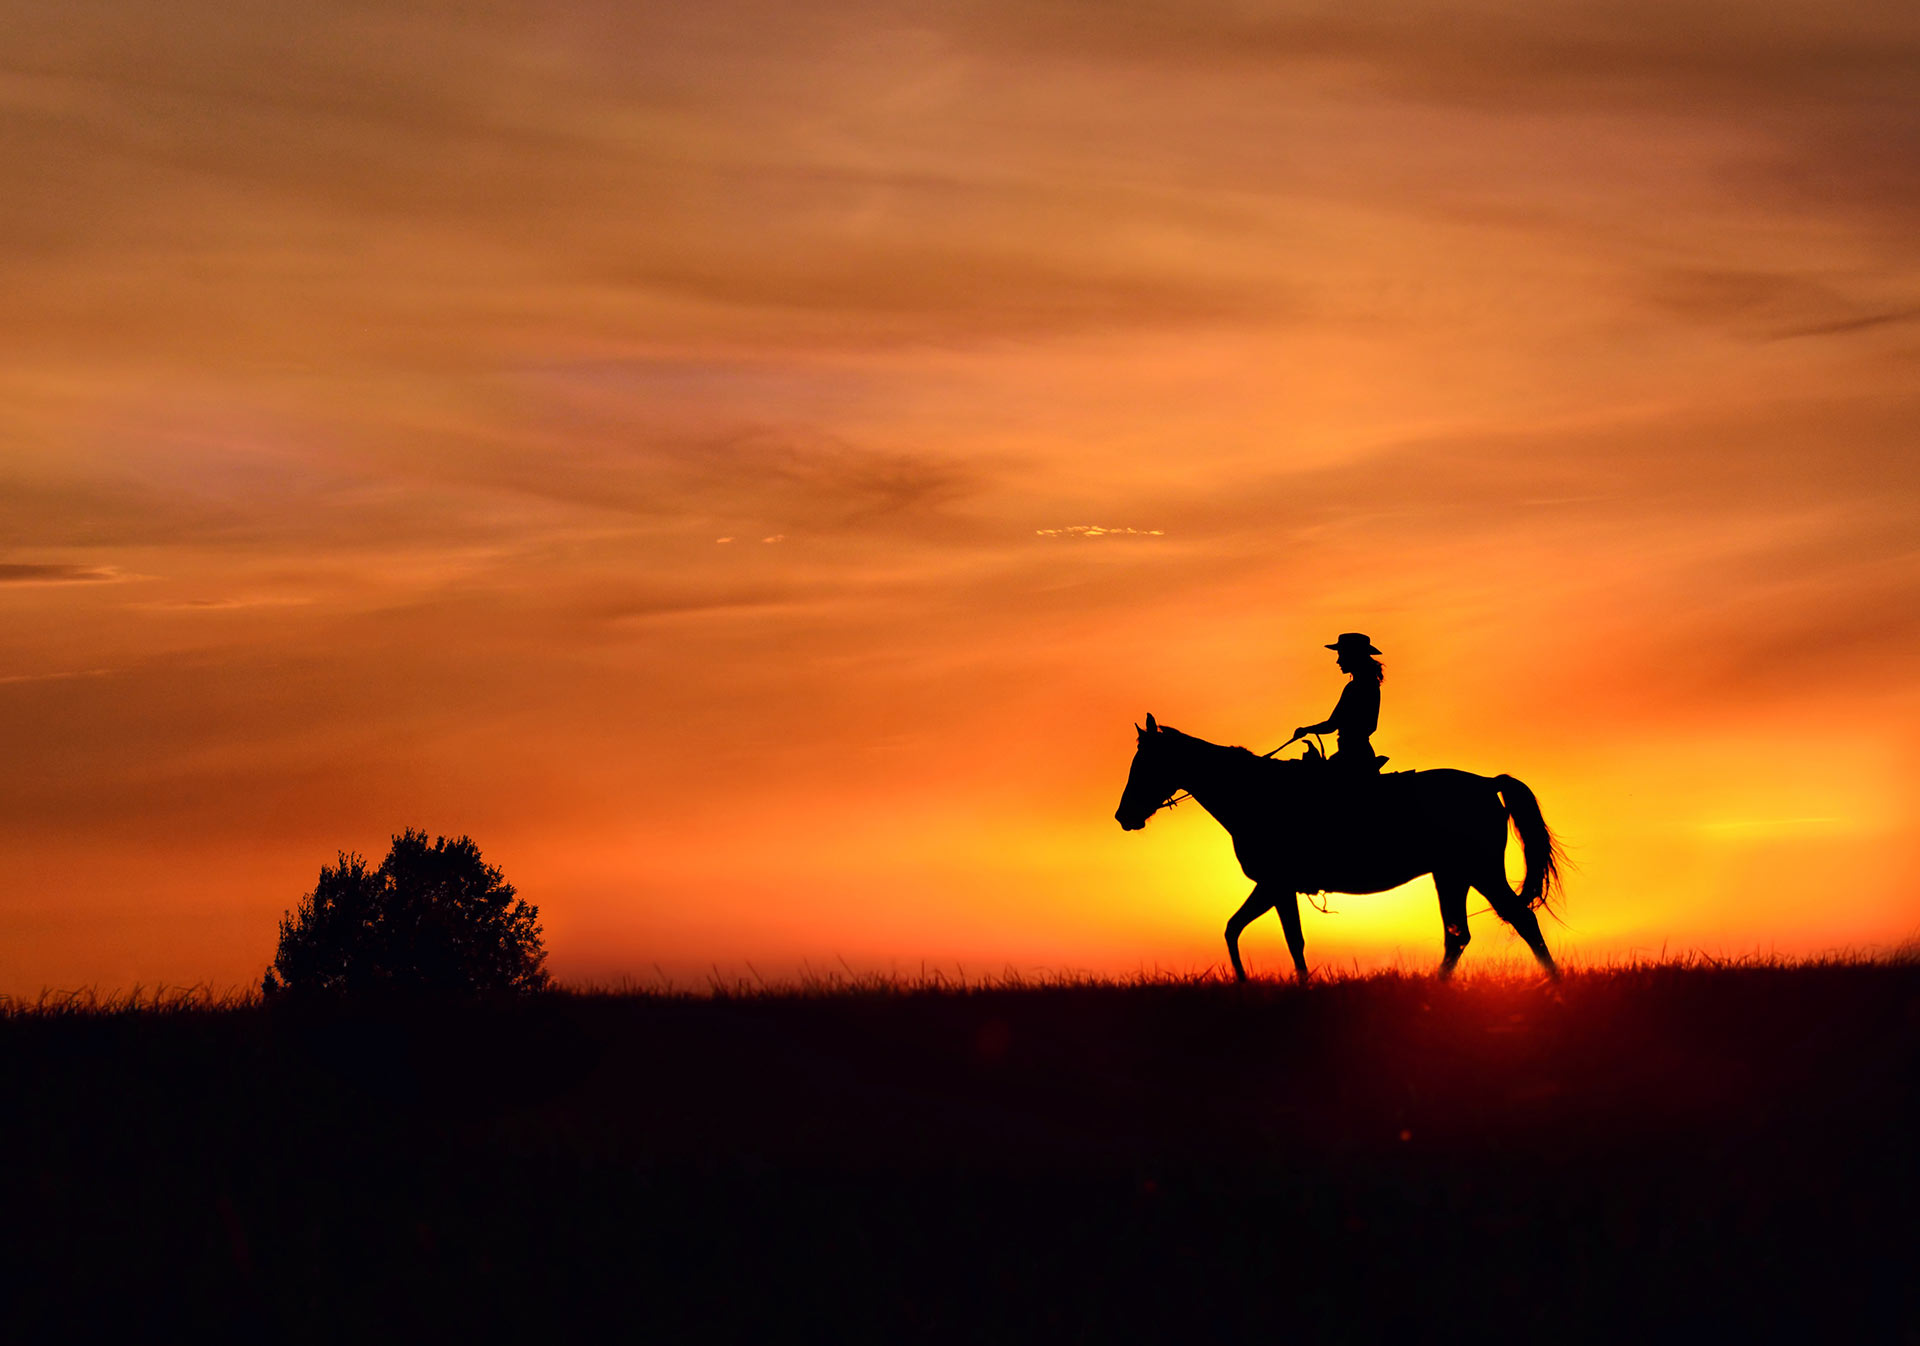 A horse and an incredible sunset! What a perfect evening!